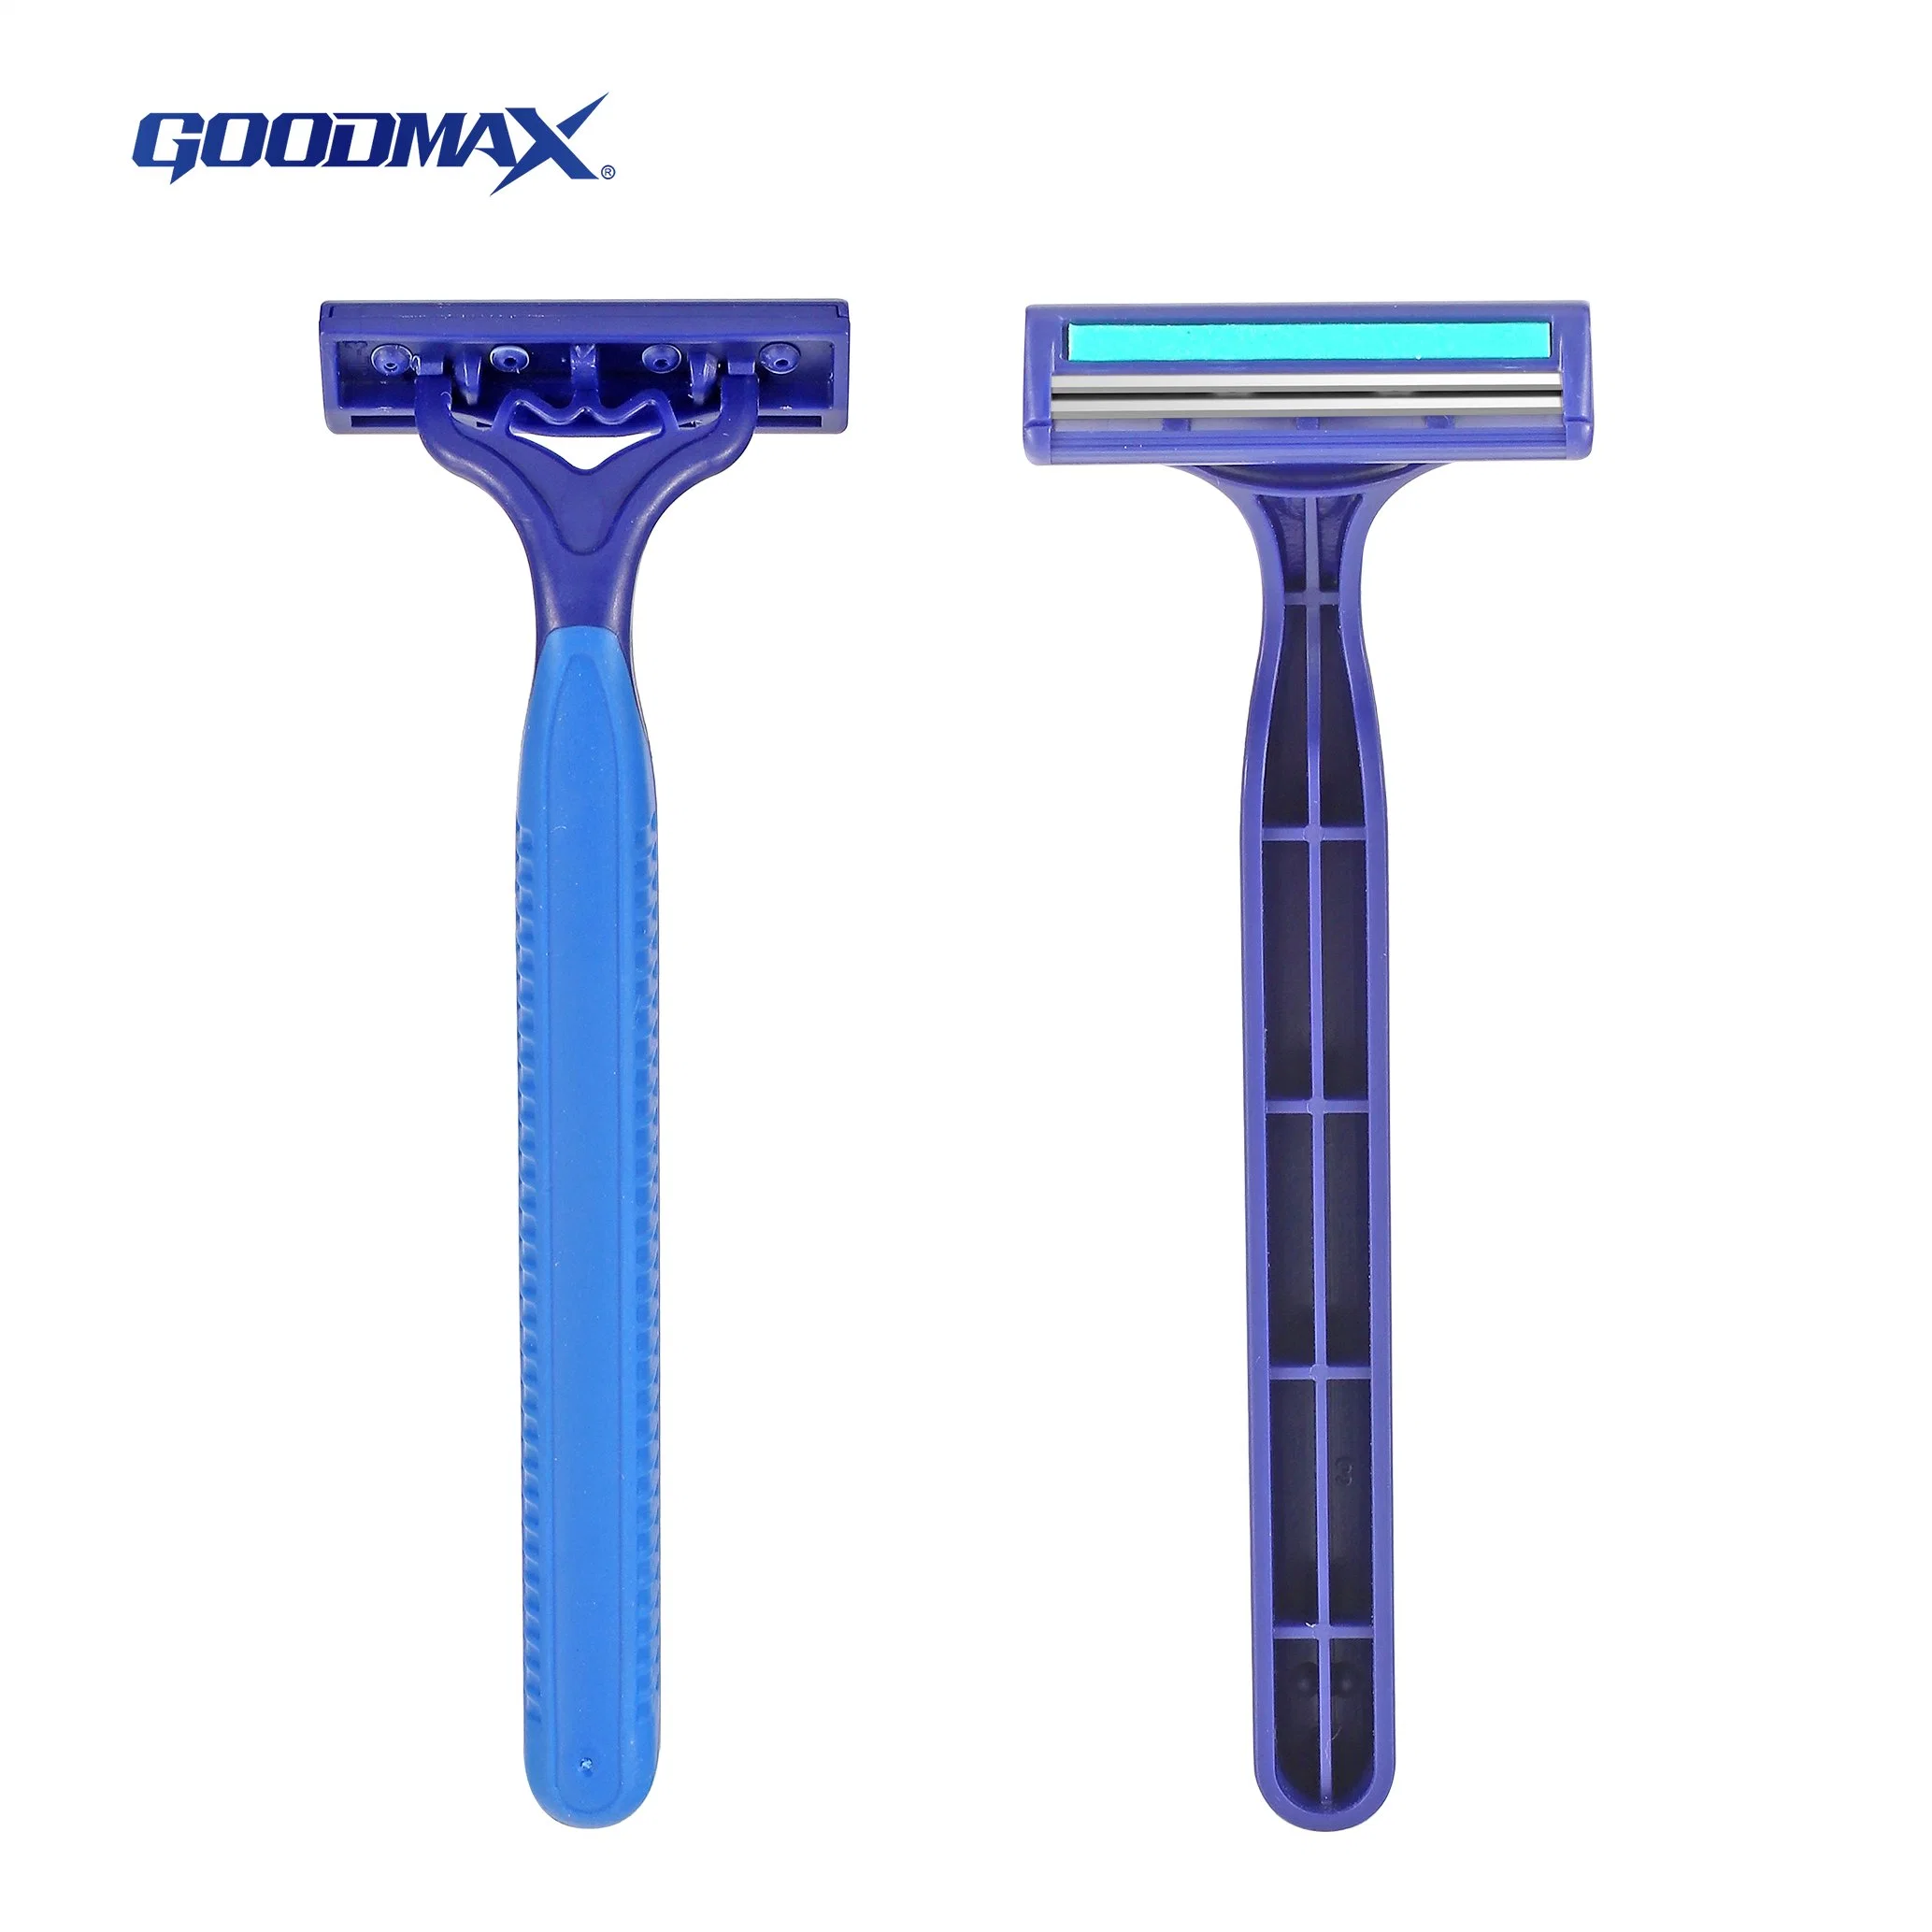 Twin Blade Disposable Razor with Pivoting Head